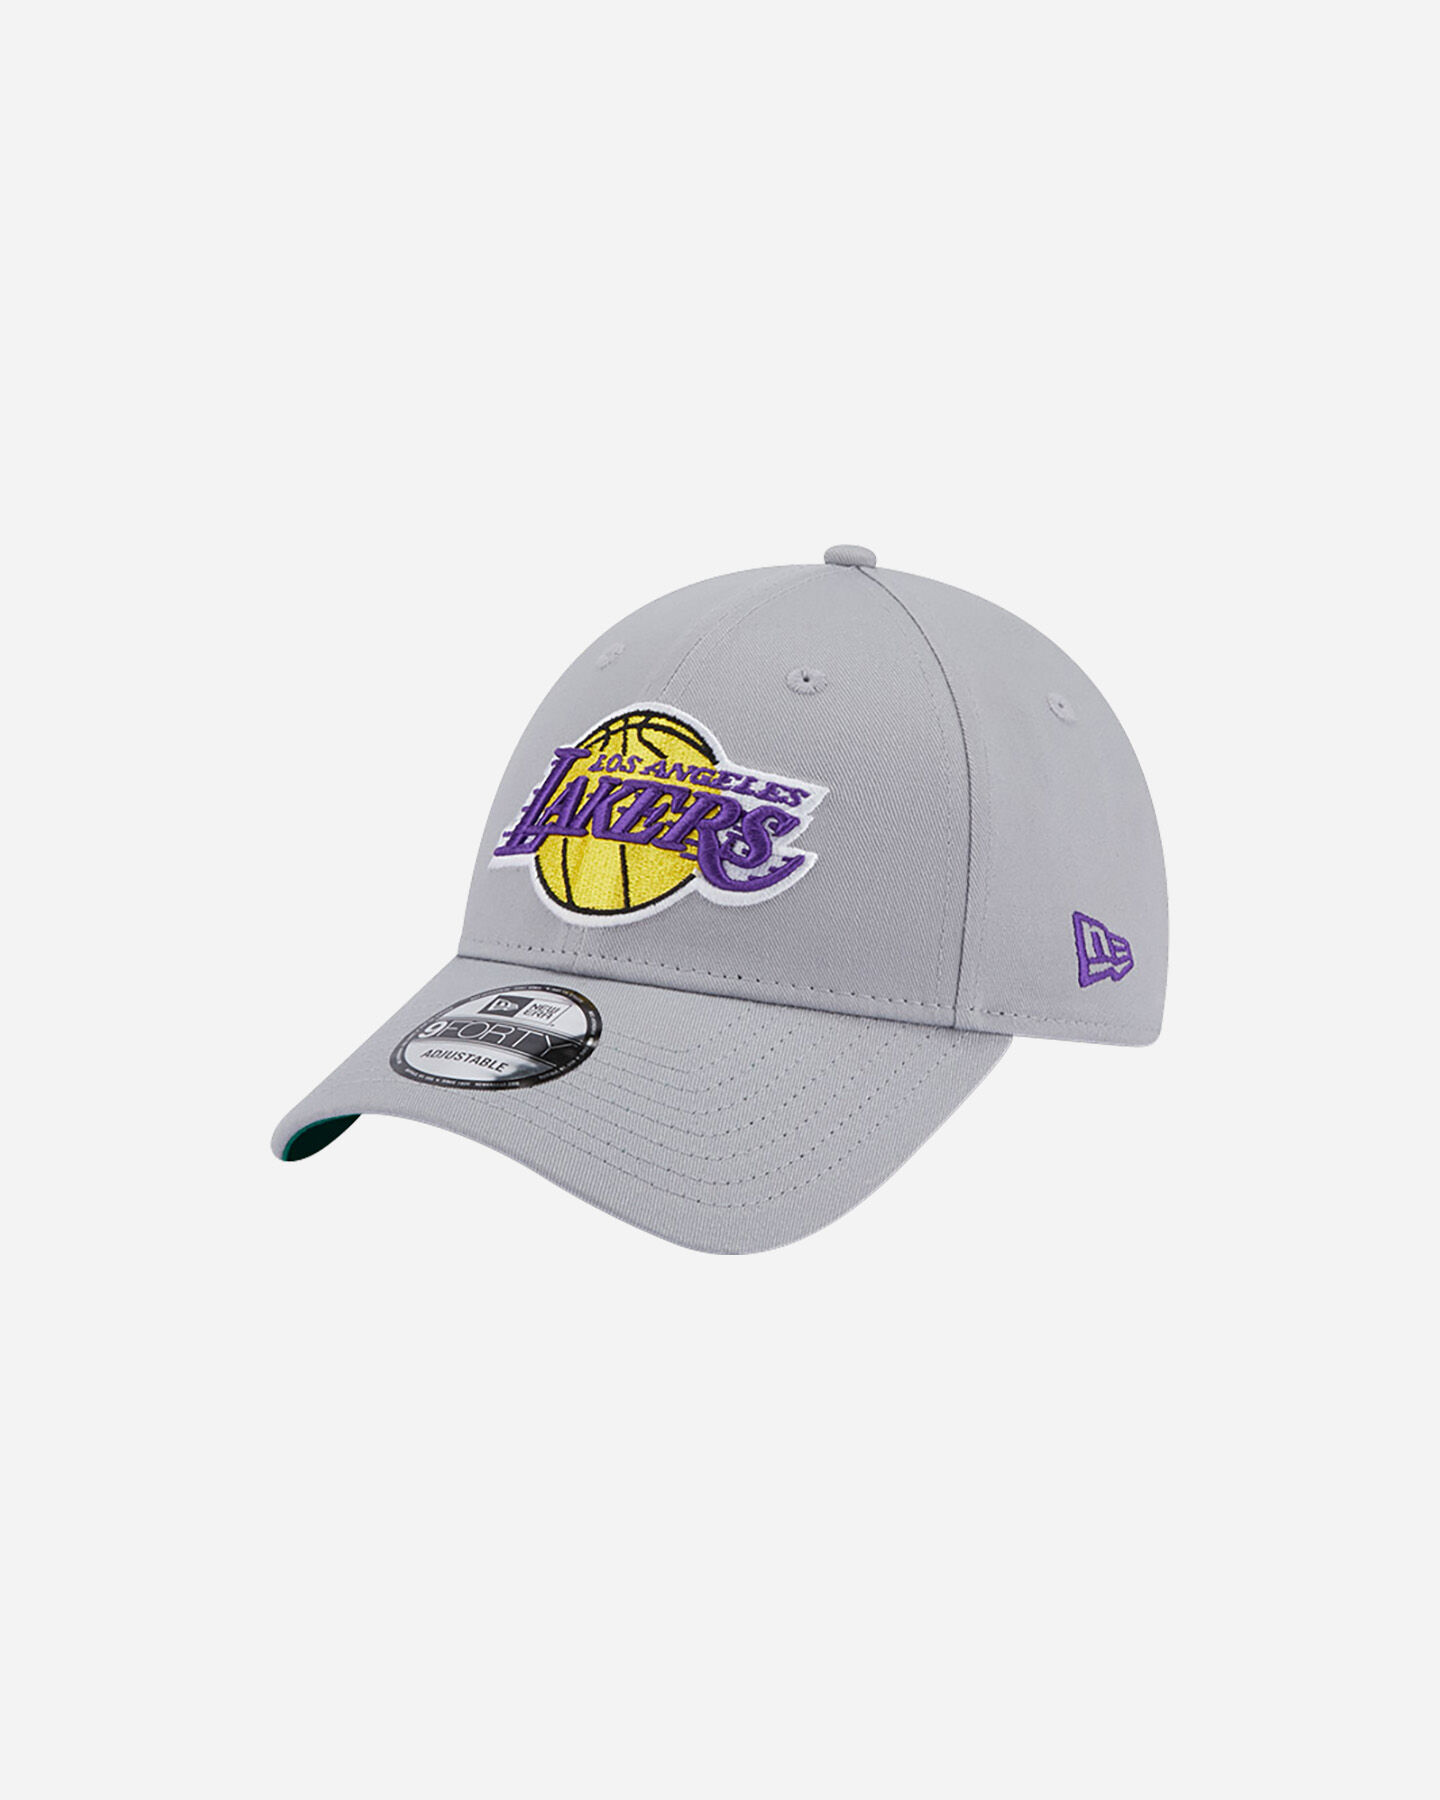  Cappellino NEW ERA 9FORTY TEAM SIDE PATCH LOS ANGELES LAKERS  S5606220|020|OSFM scatto 0